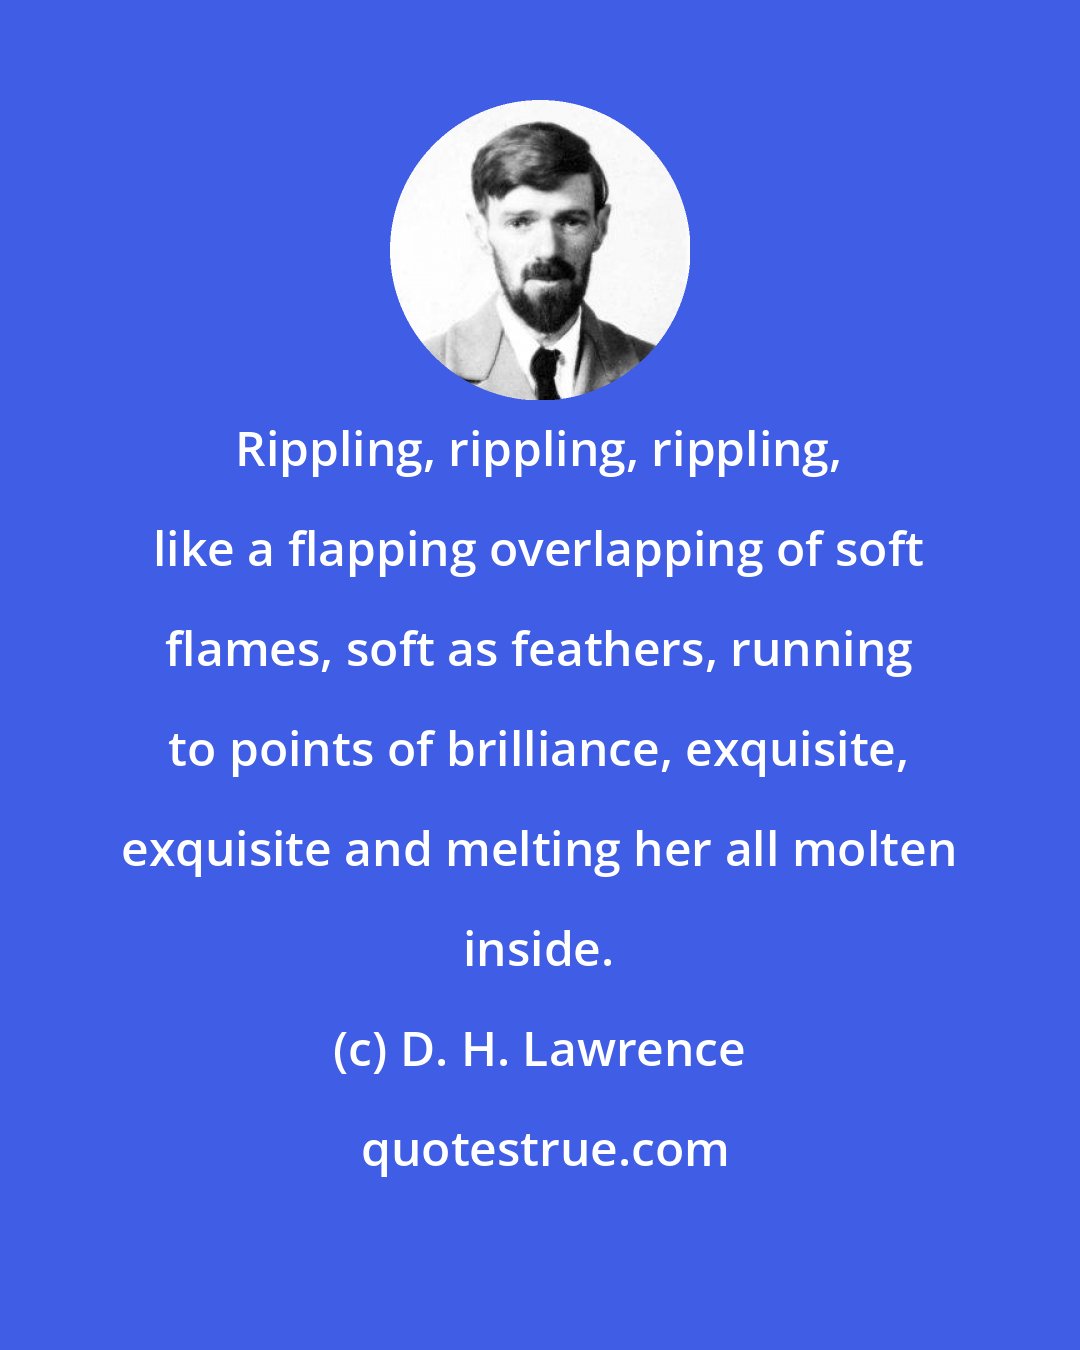 D. H. Lawrence: Rippling, rippling, rippling, like a flapping overlapping of soft flames, soft as feathers, running to points of brilliance, exquisite, exquisite and melting her all molten inside.